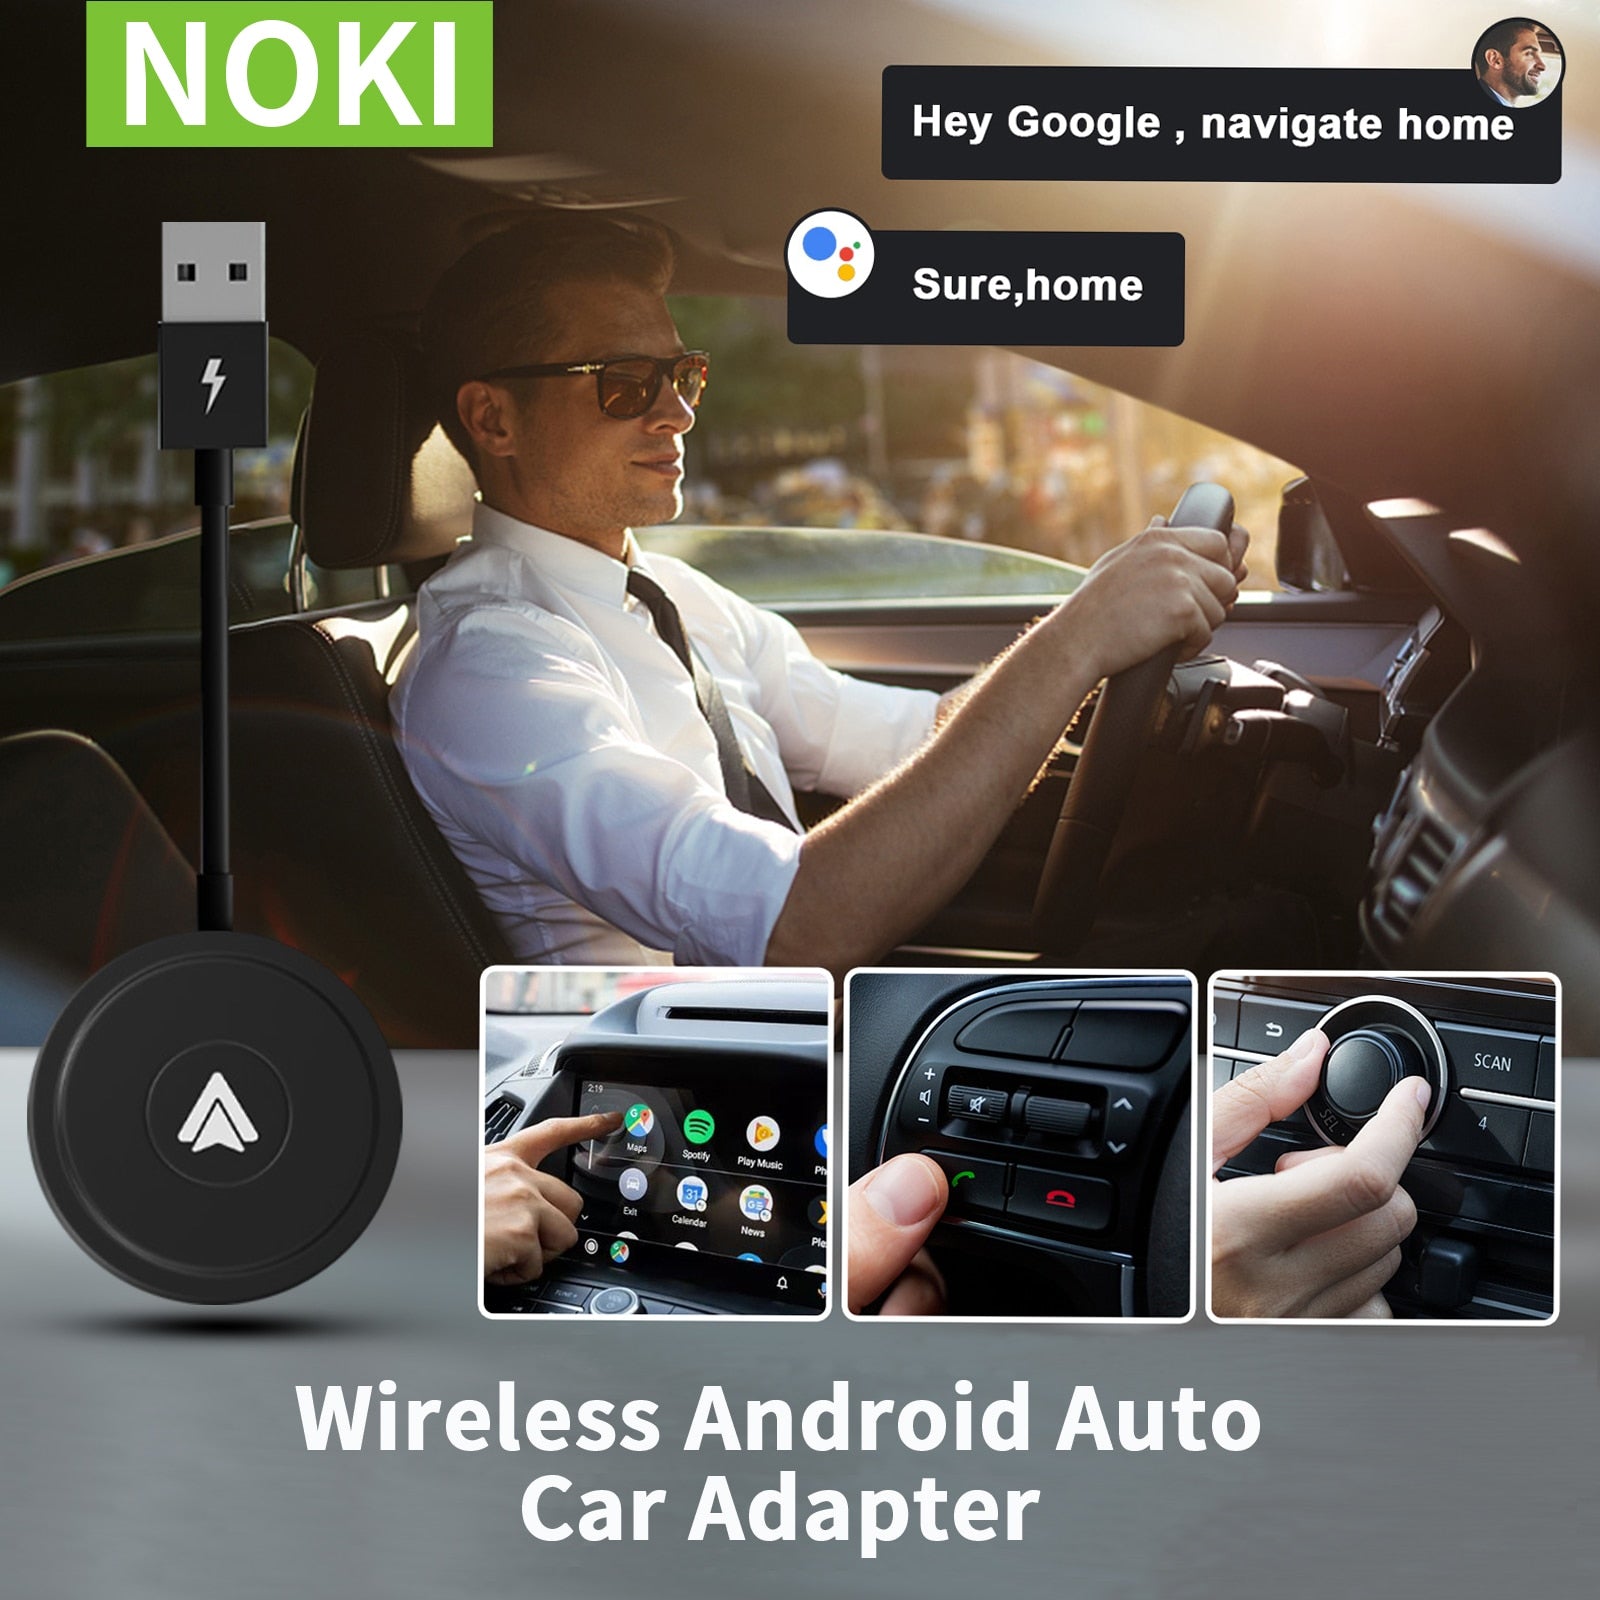 Wireless Android Auto Adapter/Dongle for OEM Factory Wired Android Auto Cars Converts Wired to Wireless Easy Setup Plug & Play